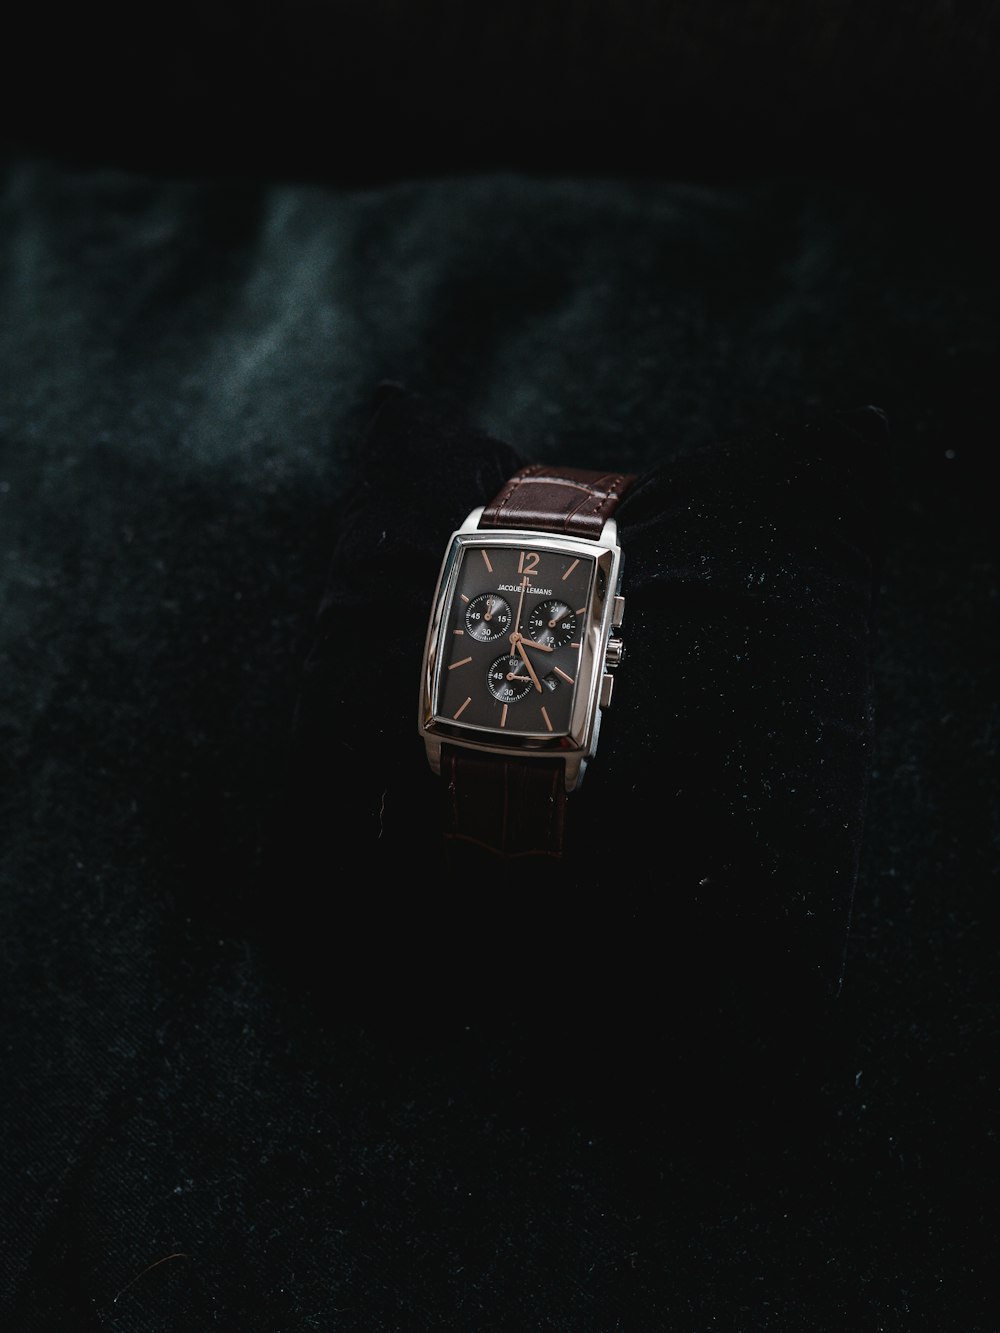 rectangular silver-colored analog watch